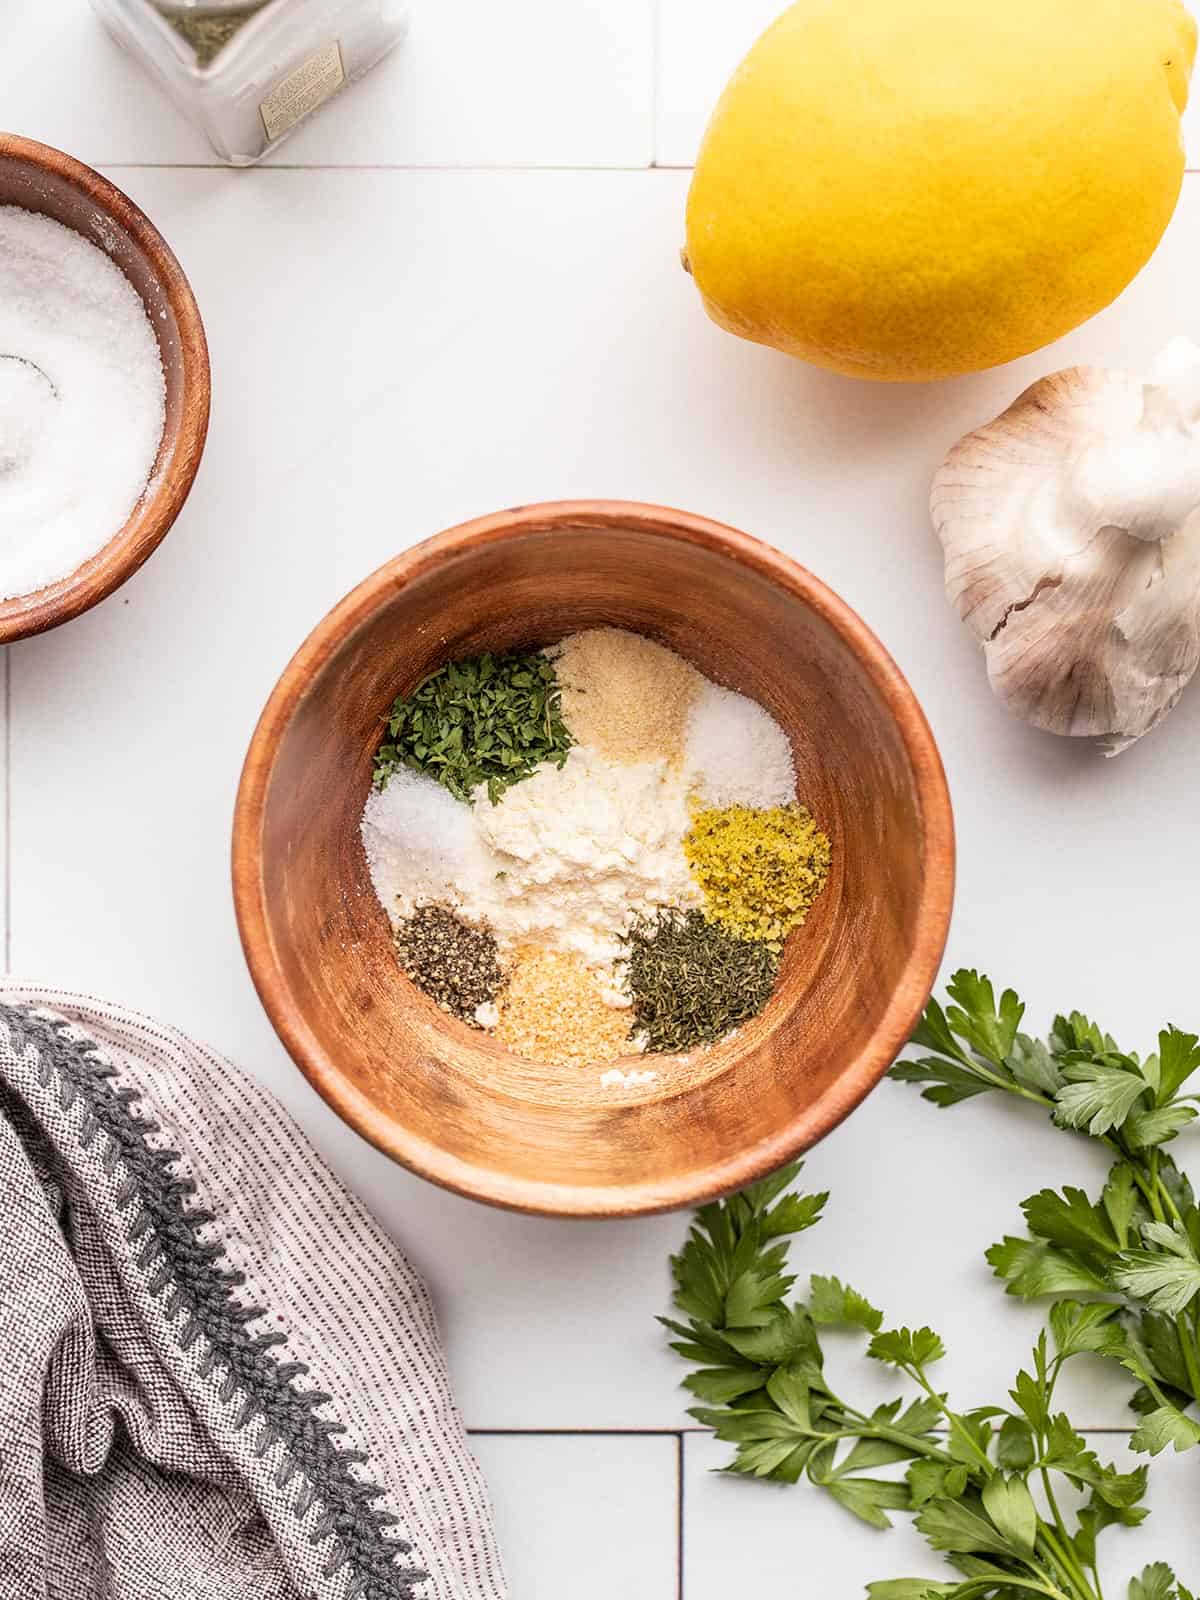 Ranch seasoning mix ingredients in a small wooden bowl with lemon, garlic, and parsley on the sides